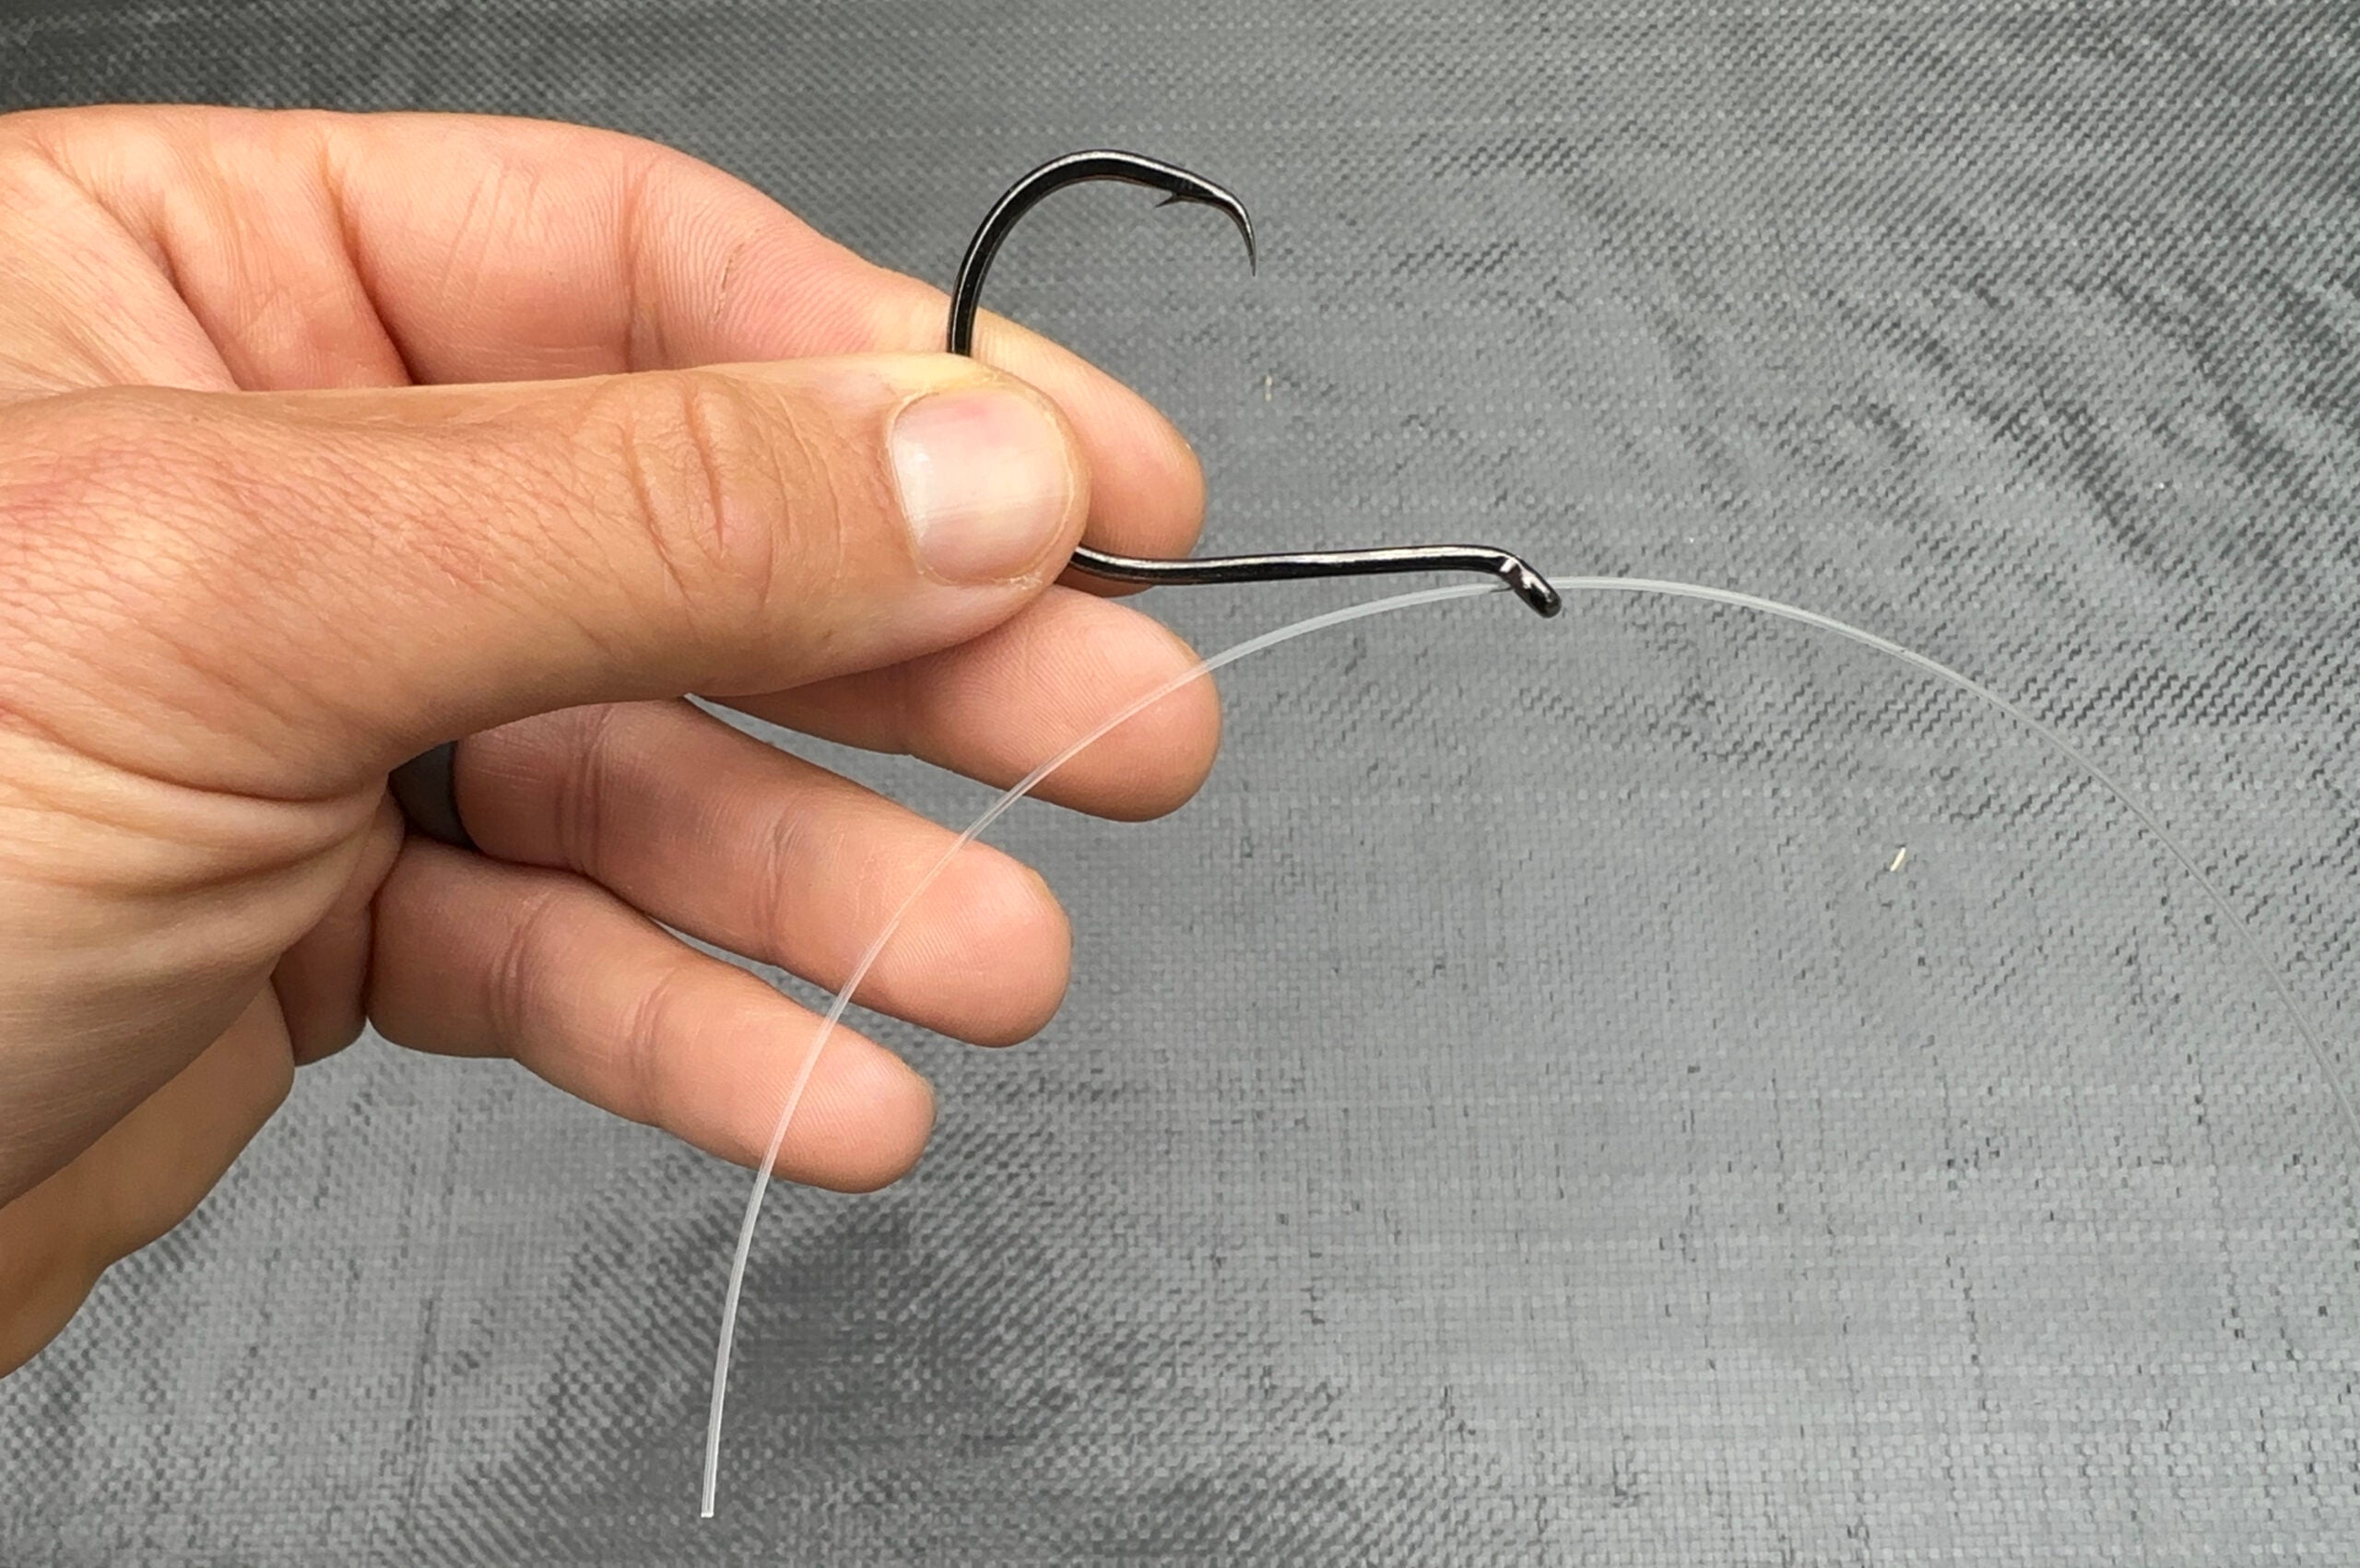 The first step in threading fishing line through a fishing hook to snell a hook